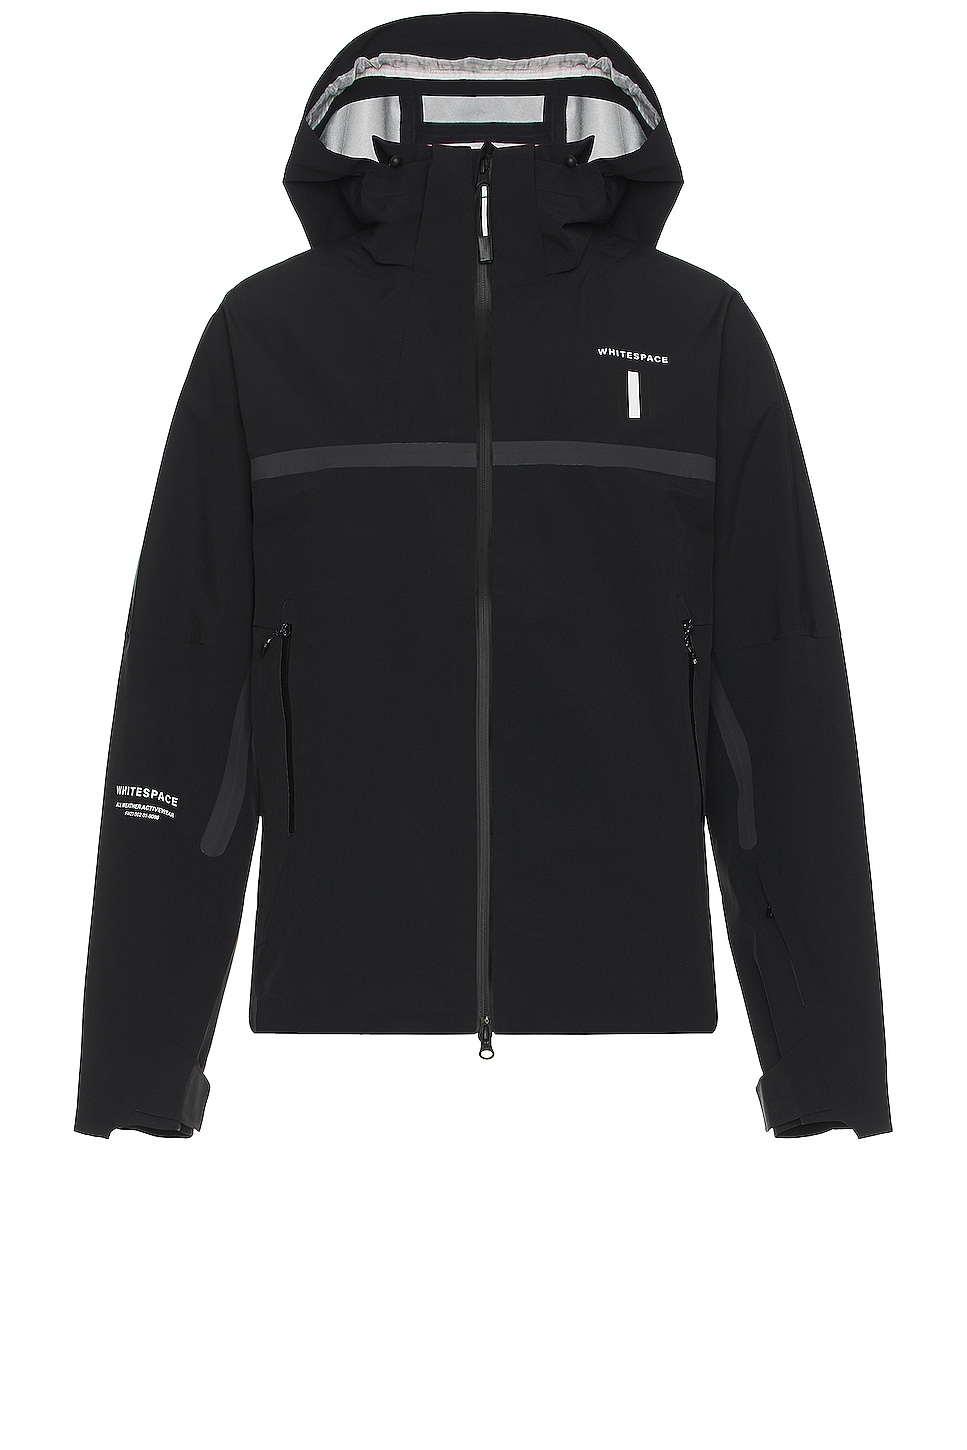 Image 1 of Whitespace 3l Performance Jacket in Black